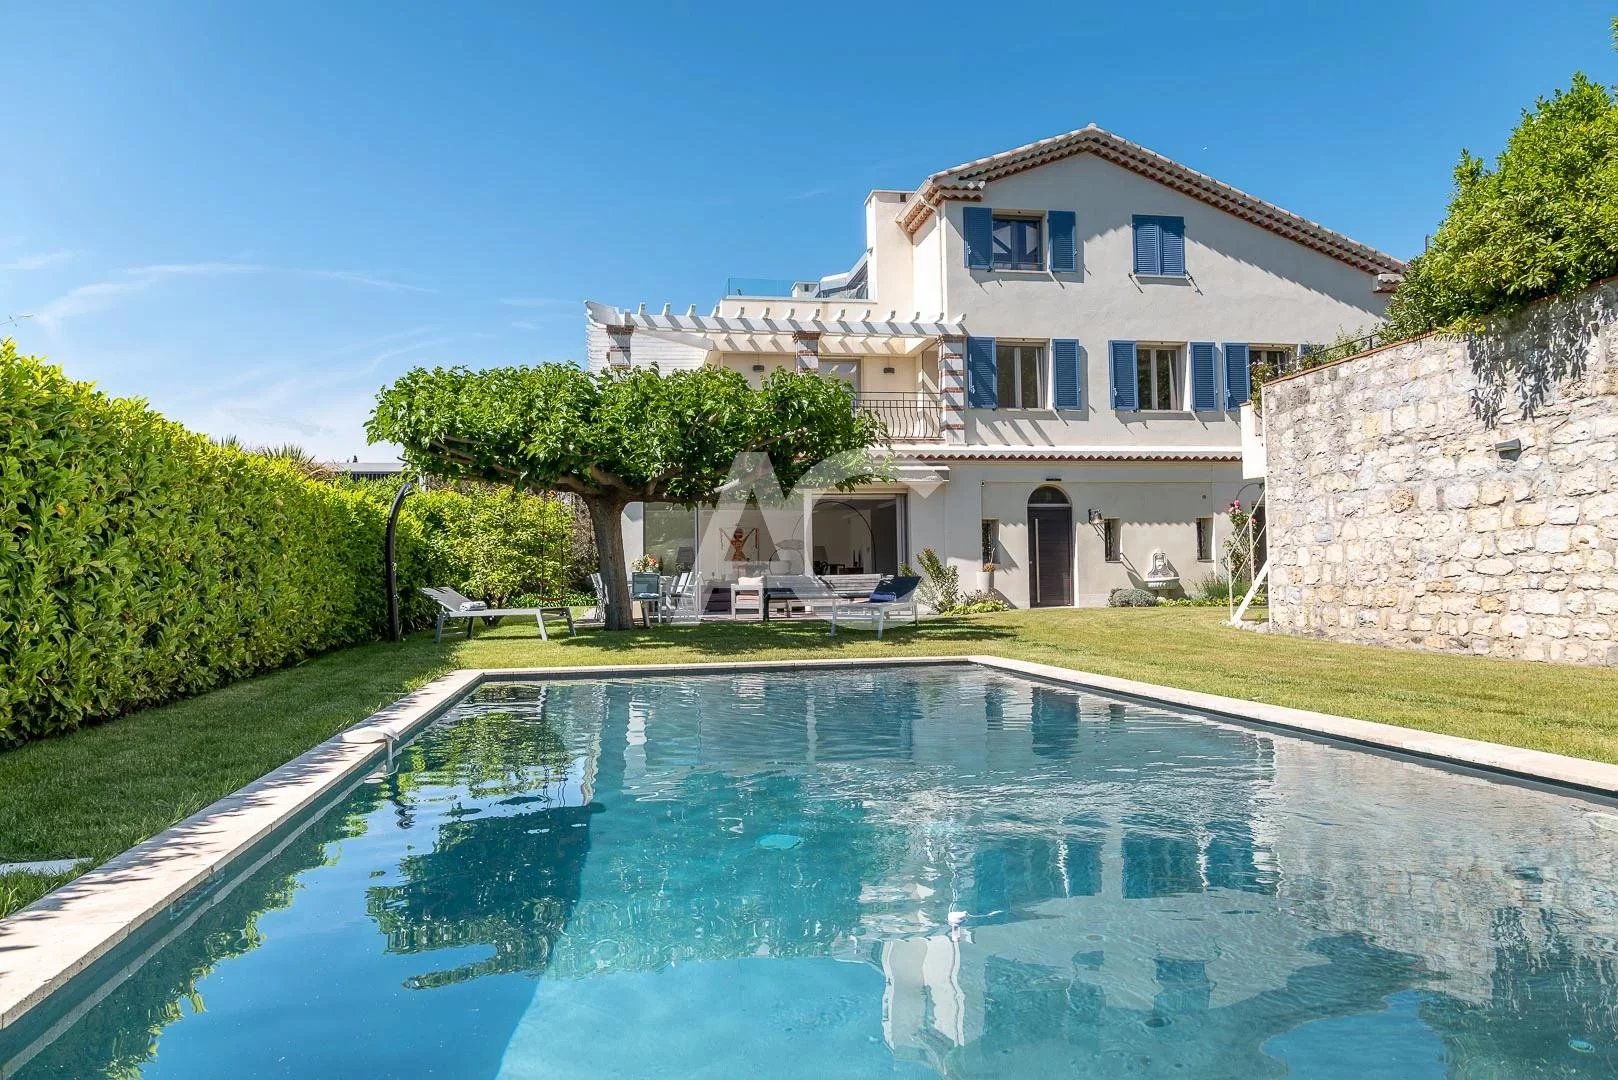 Villa in closed domain - West side of Cap d'Antibes